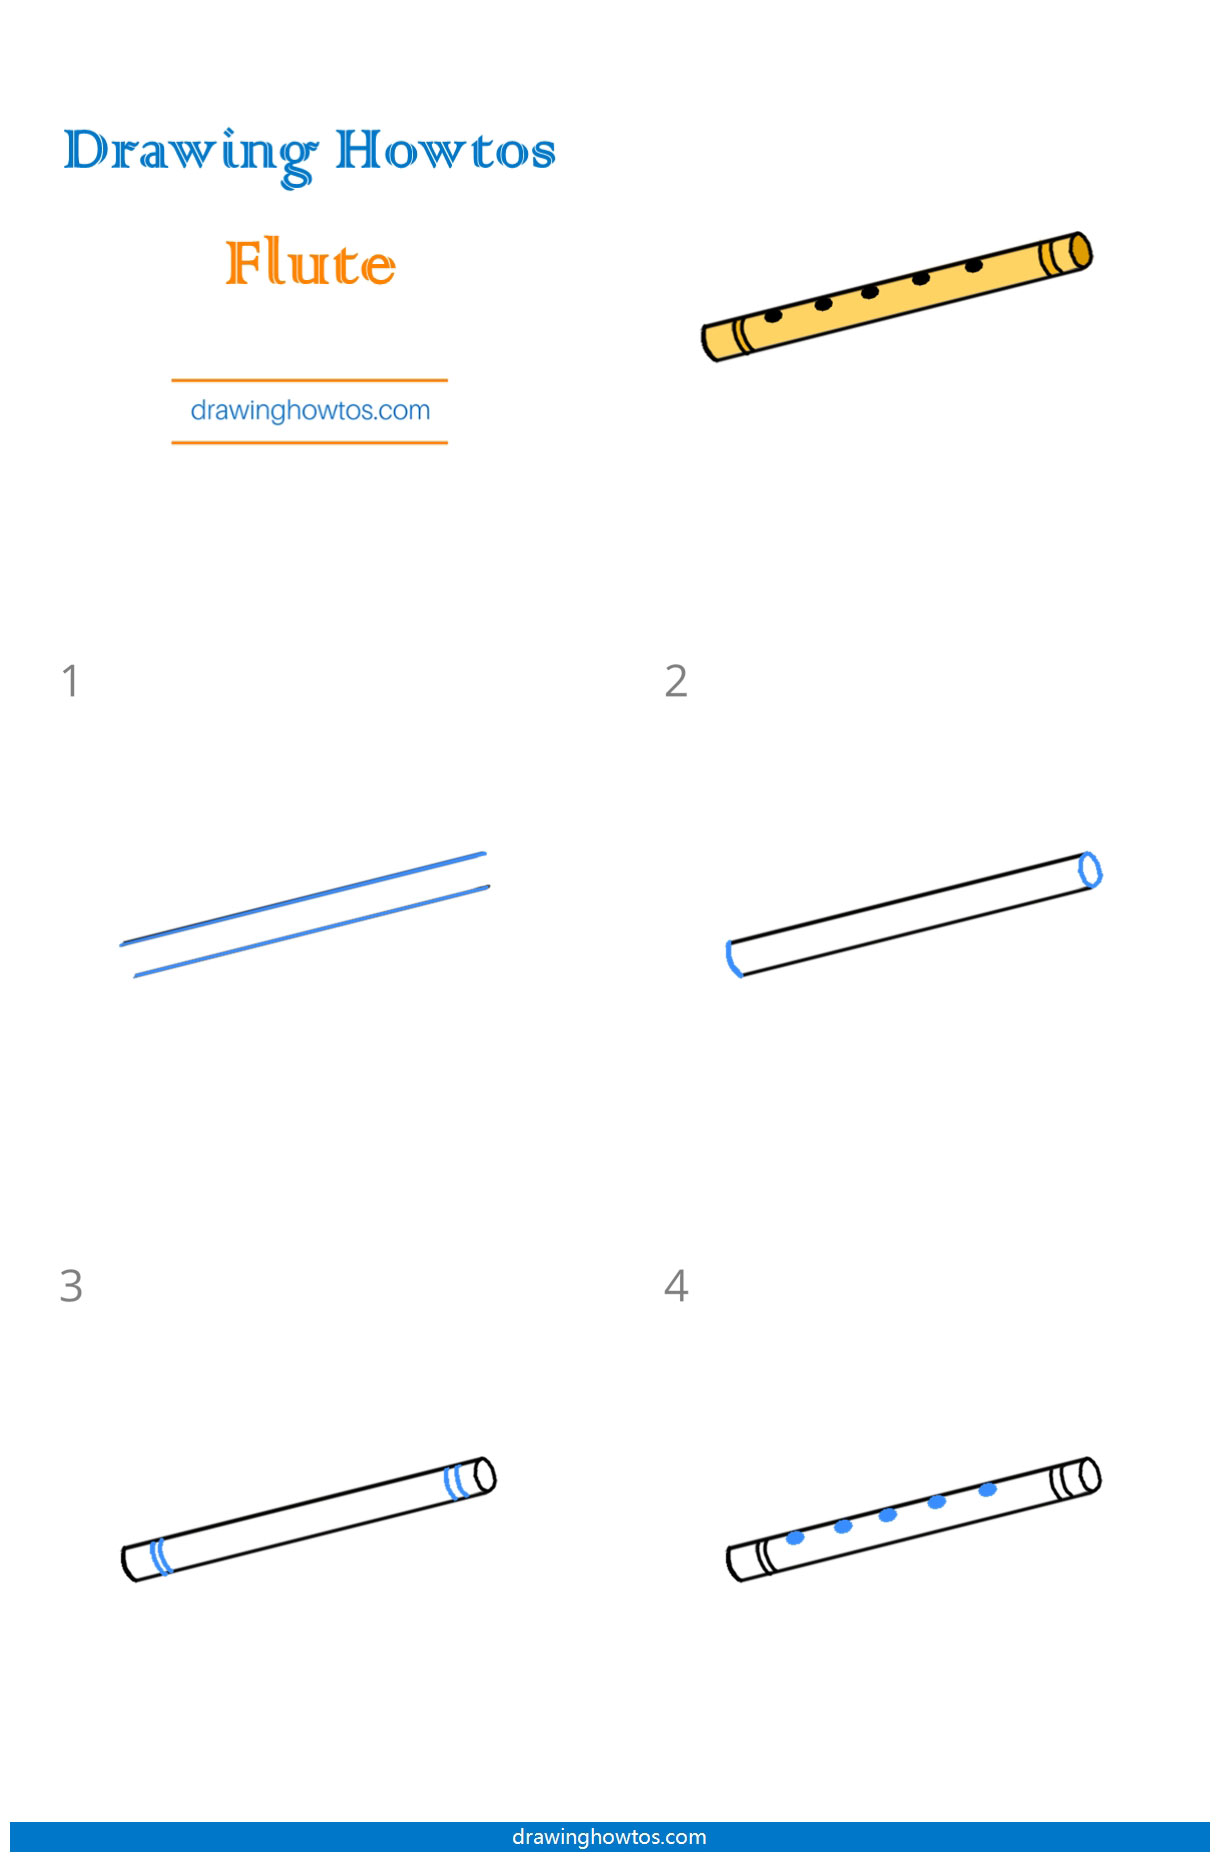 How to Draw a Flute Step by Step